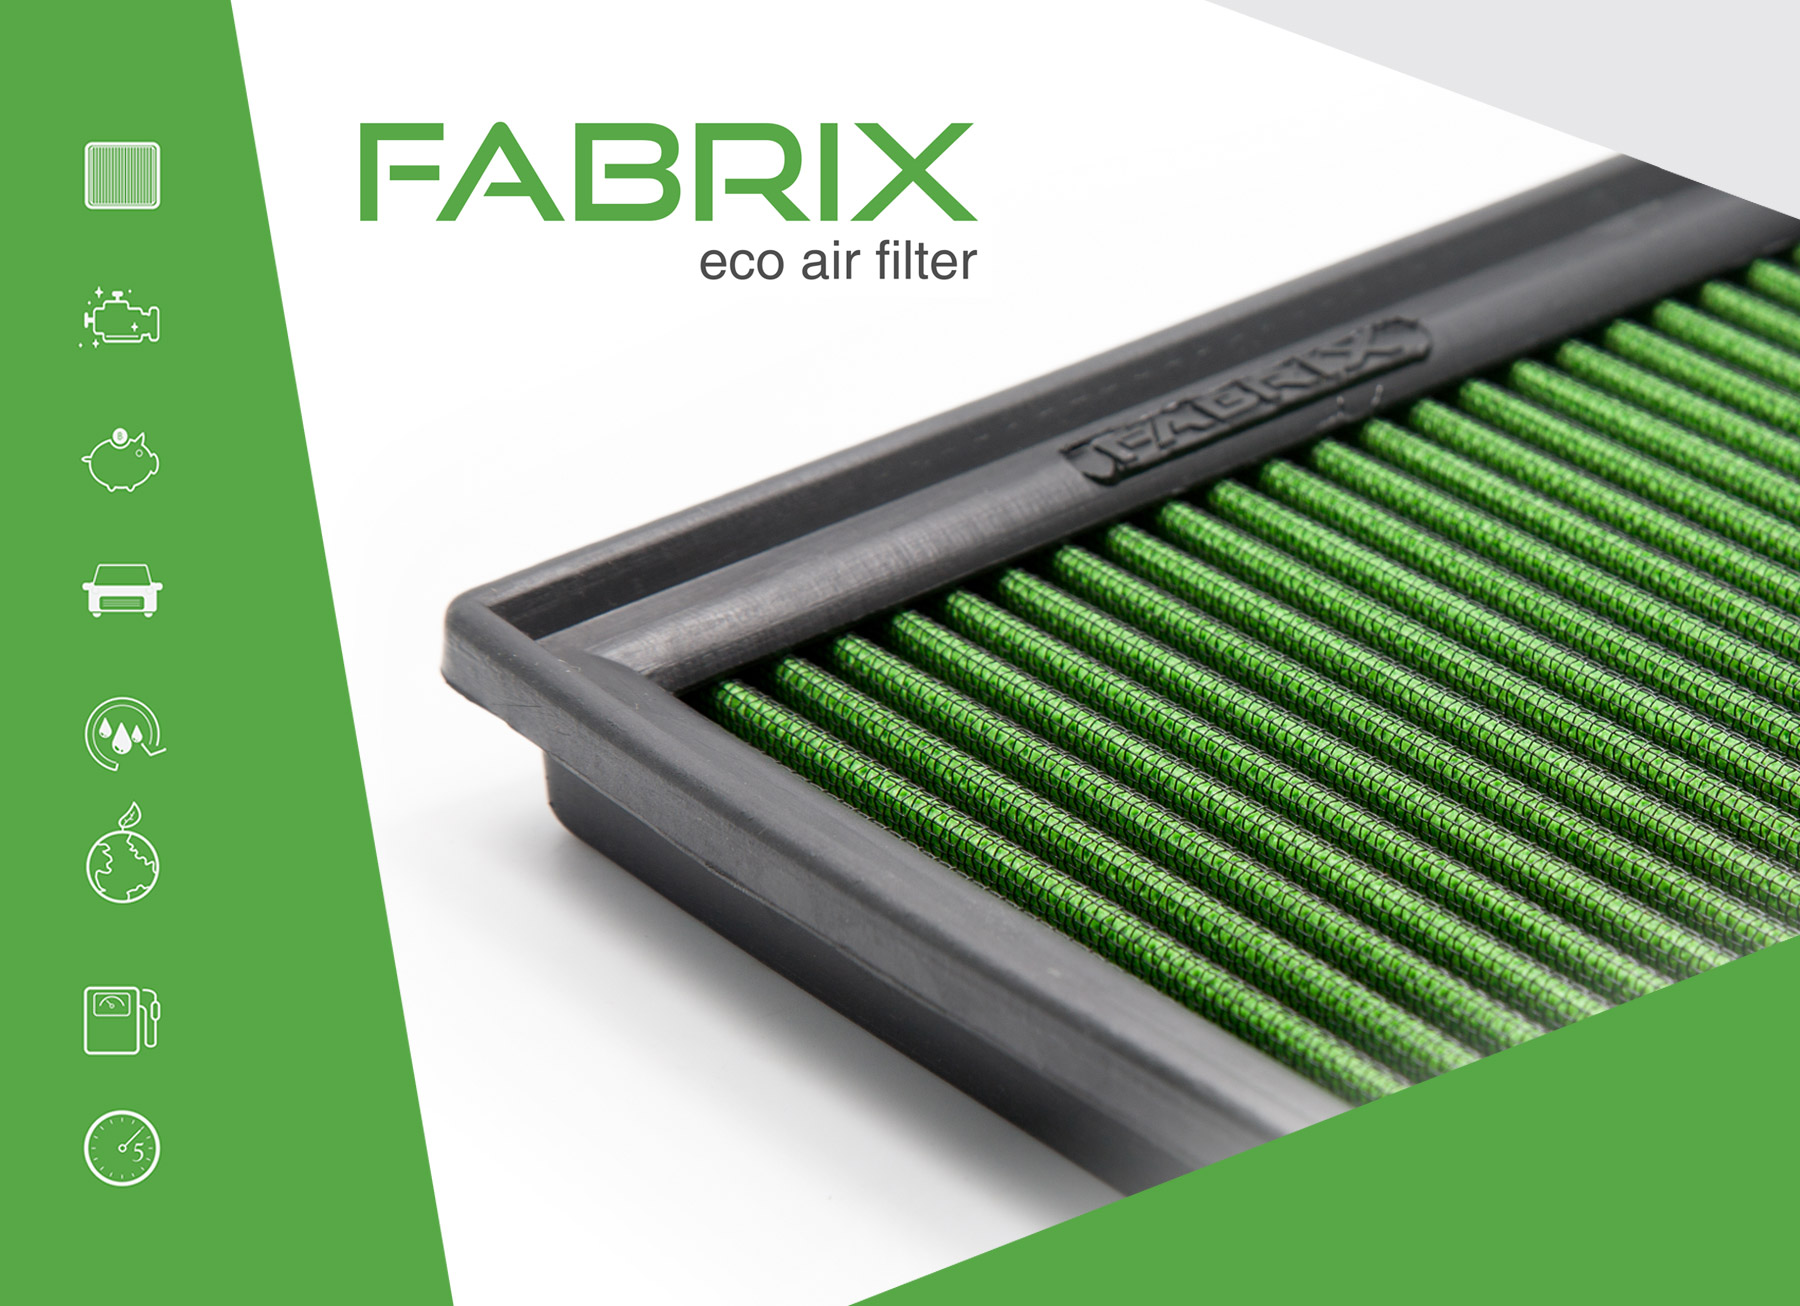 FABRIX now offers eco-friendly, reusable air filters in the Philippines